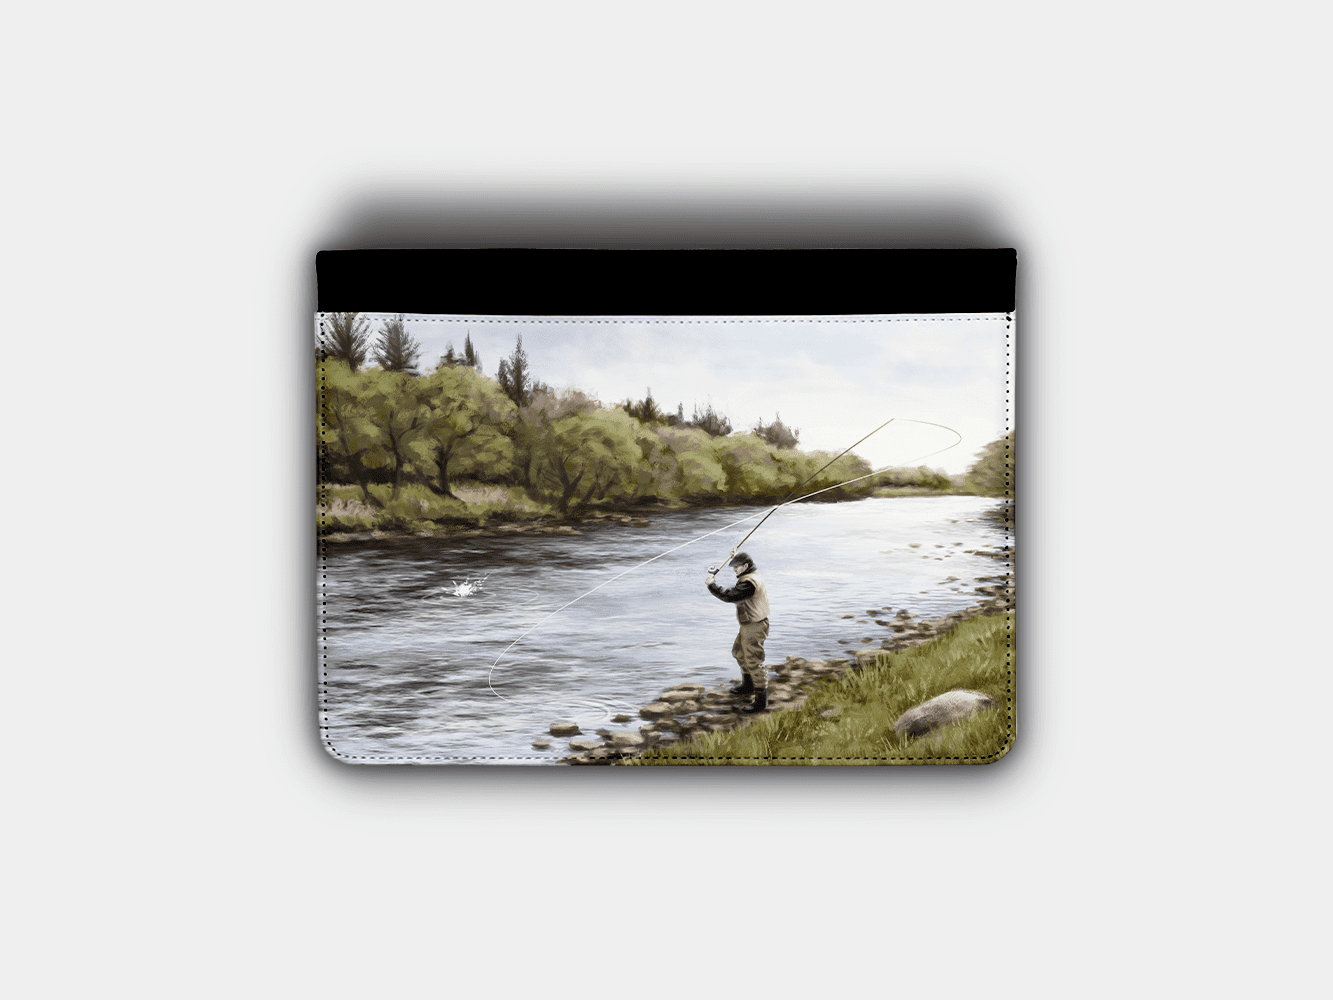 Country Images Personalised Custom Customised Flip iPad Cover Case Scotland Scottish Highlands Fly Angling Angler Fishing Gift Gifts 2